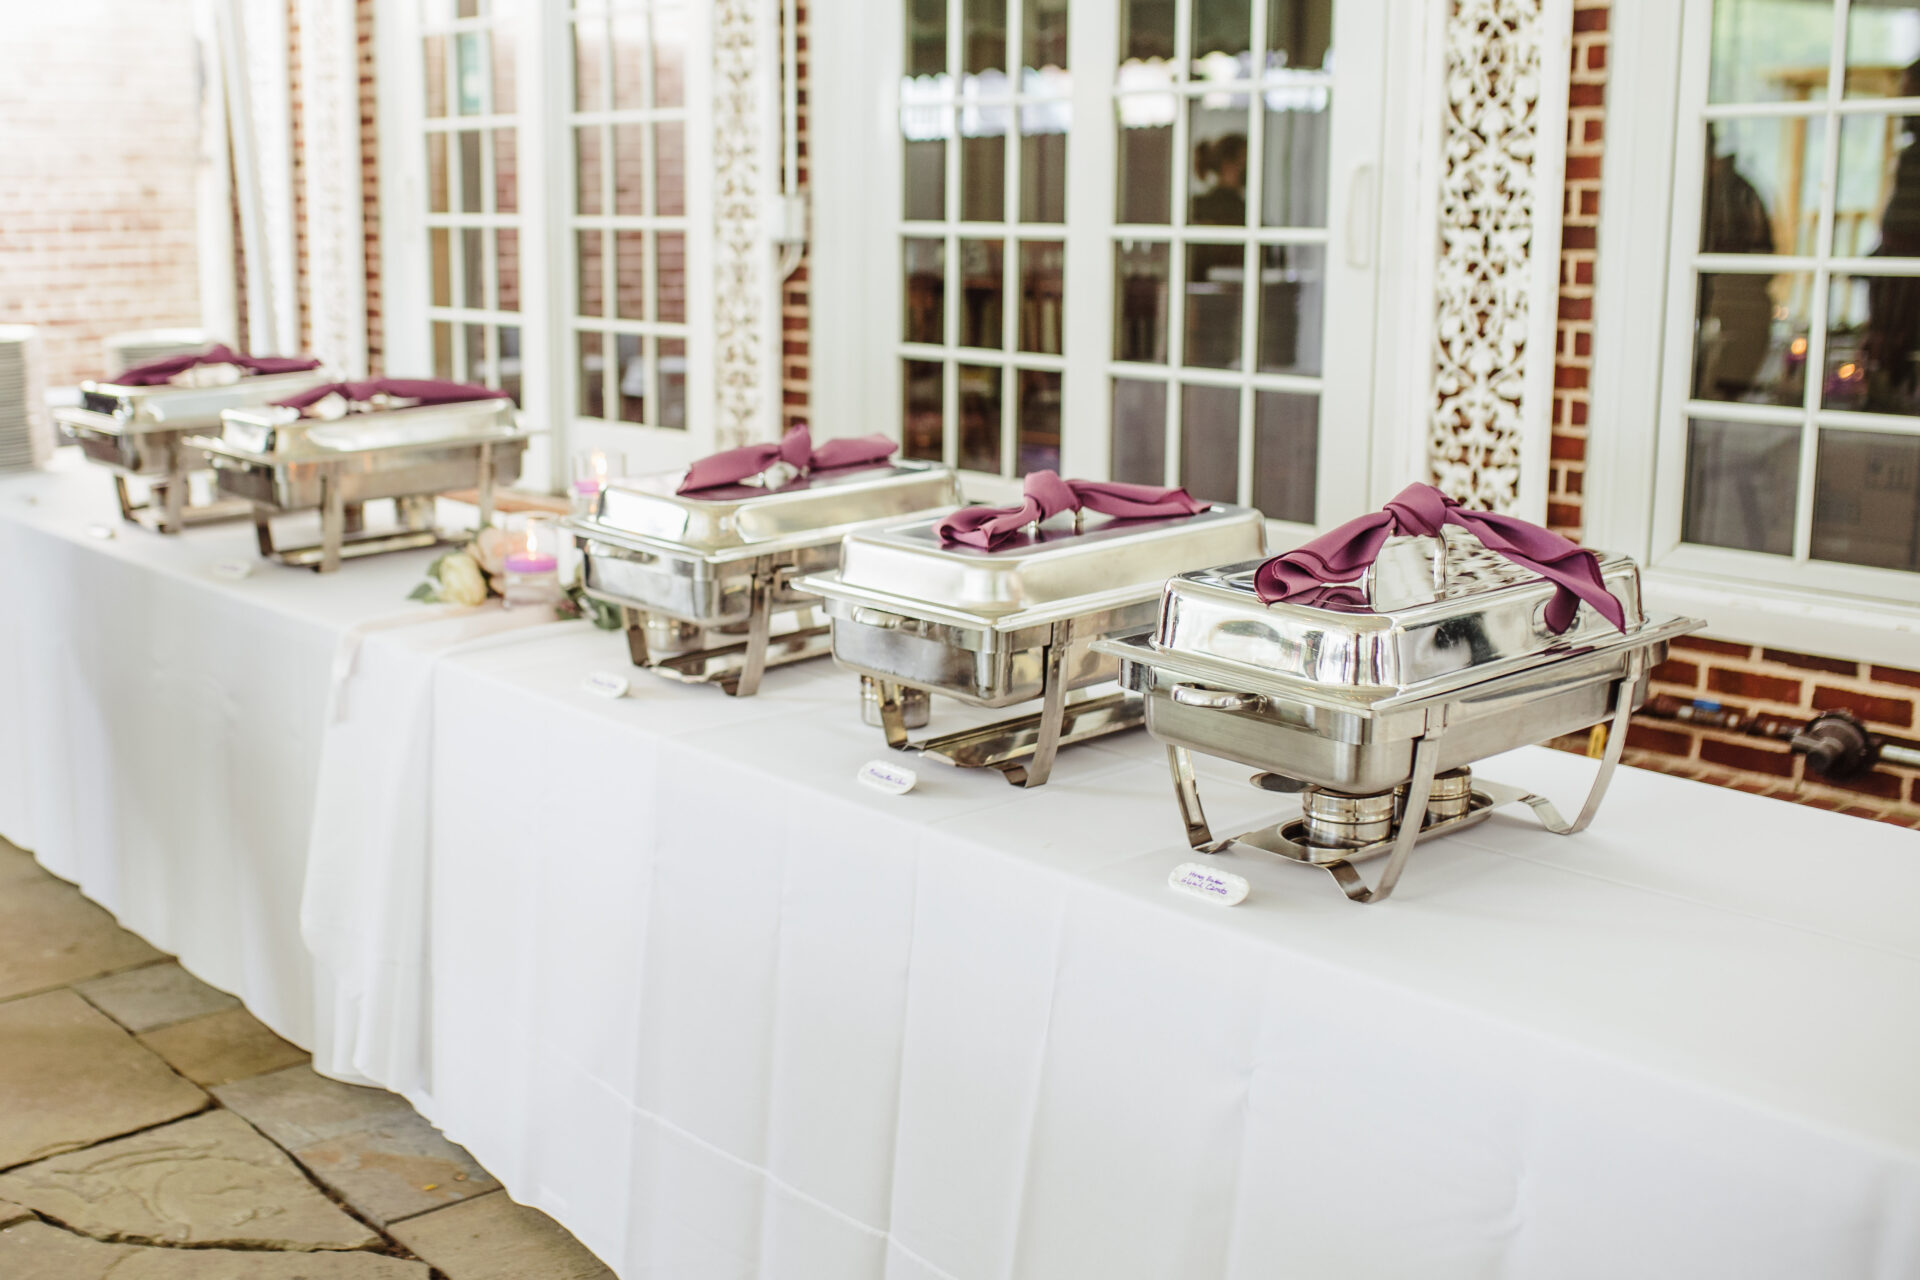 Wedding Catering Pictures at Drumore Estate (13)